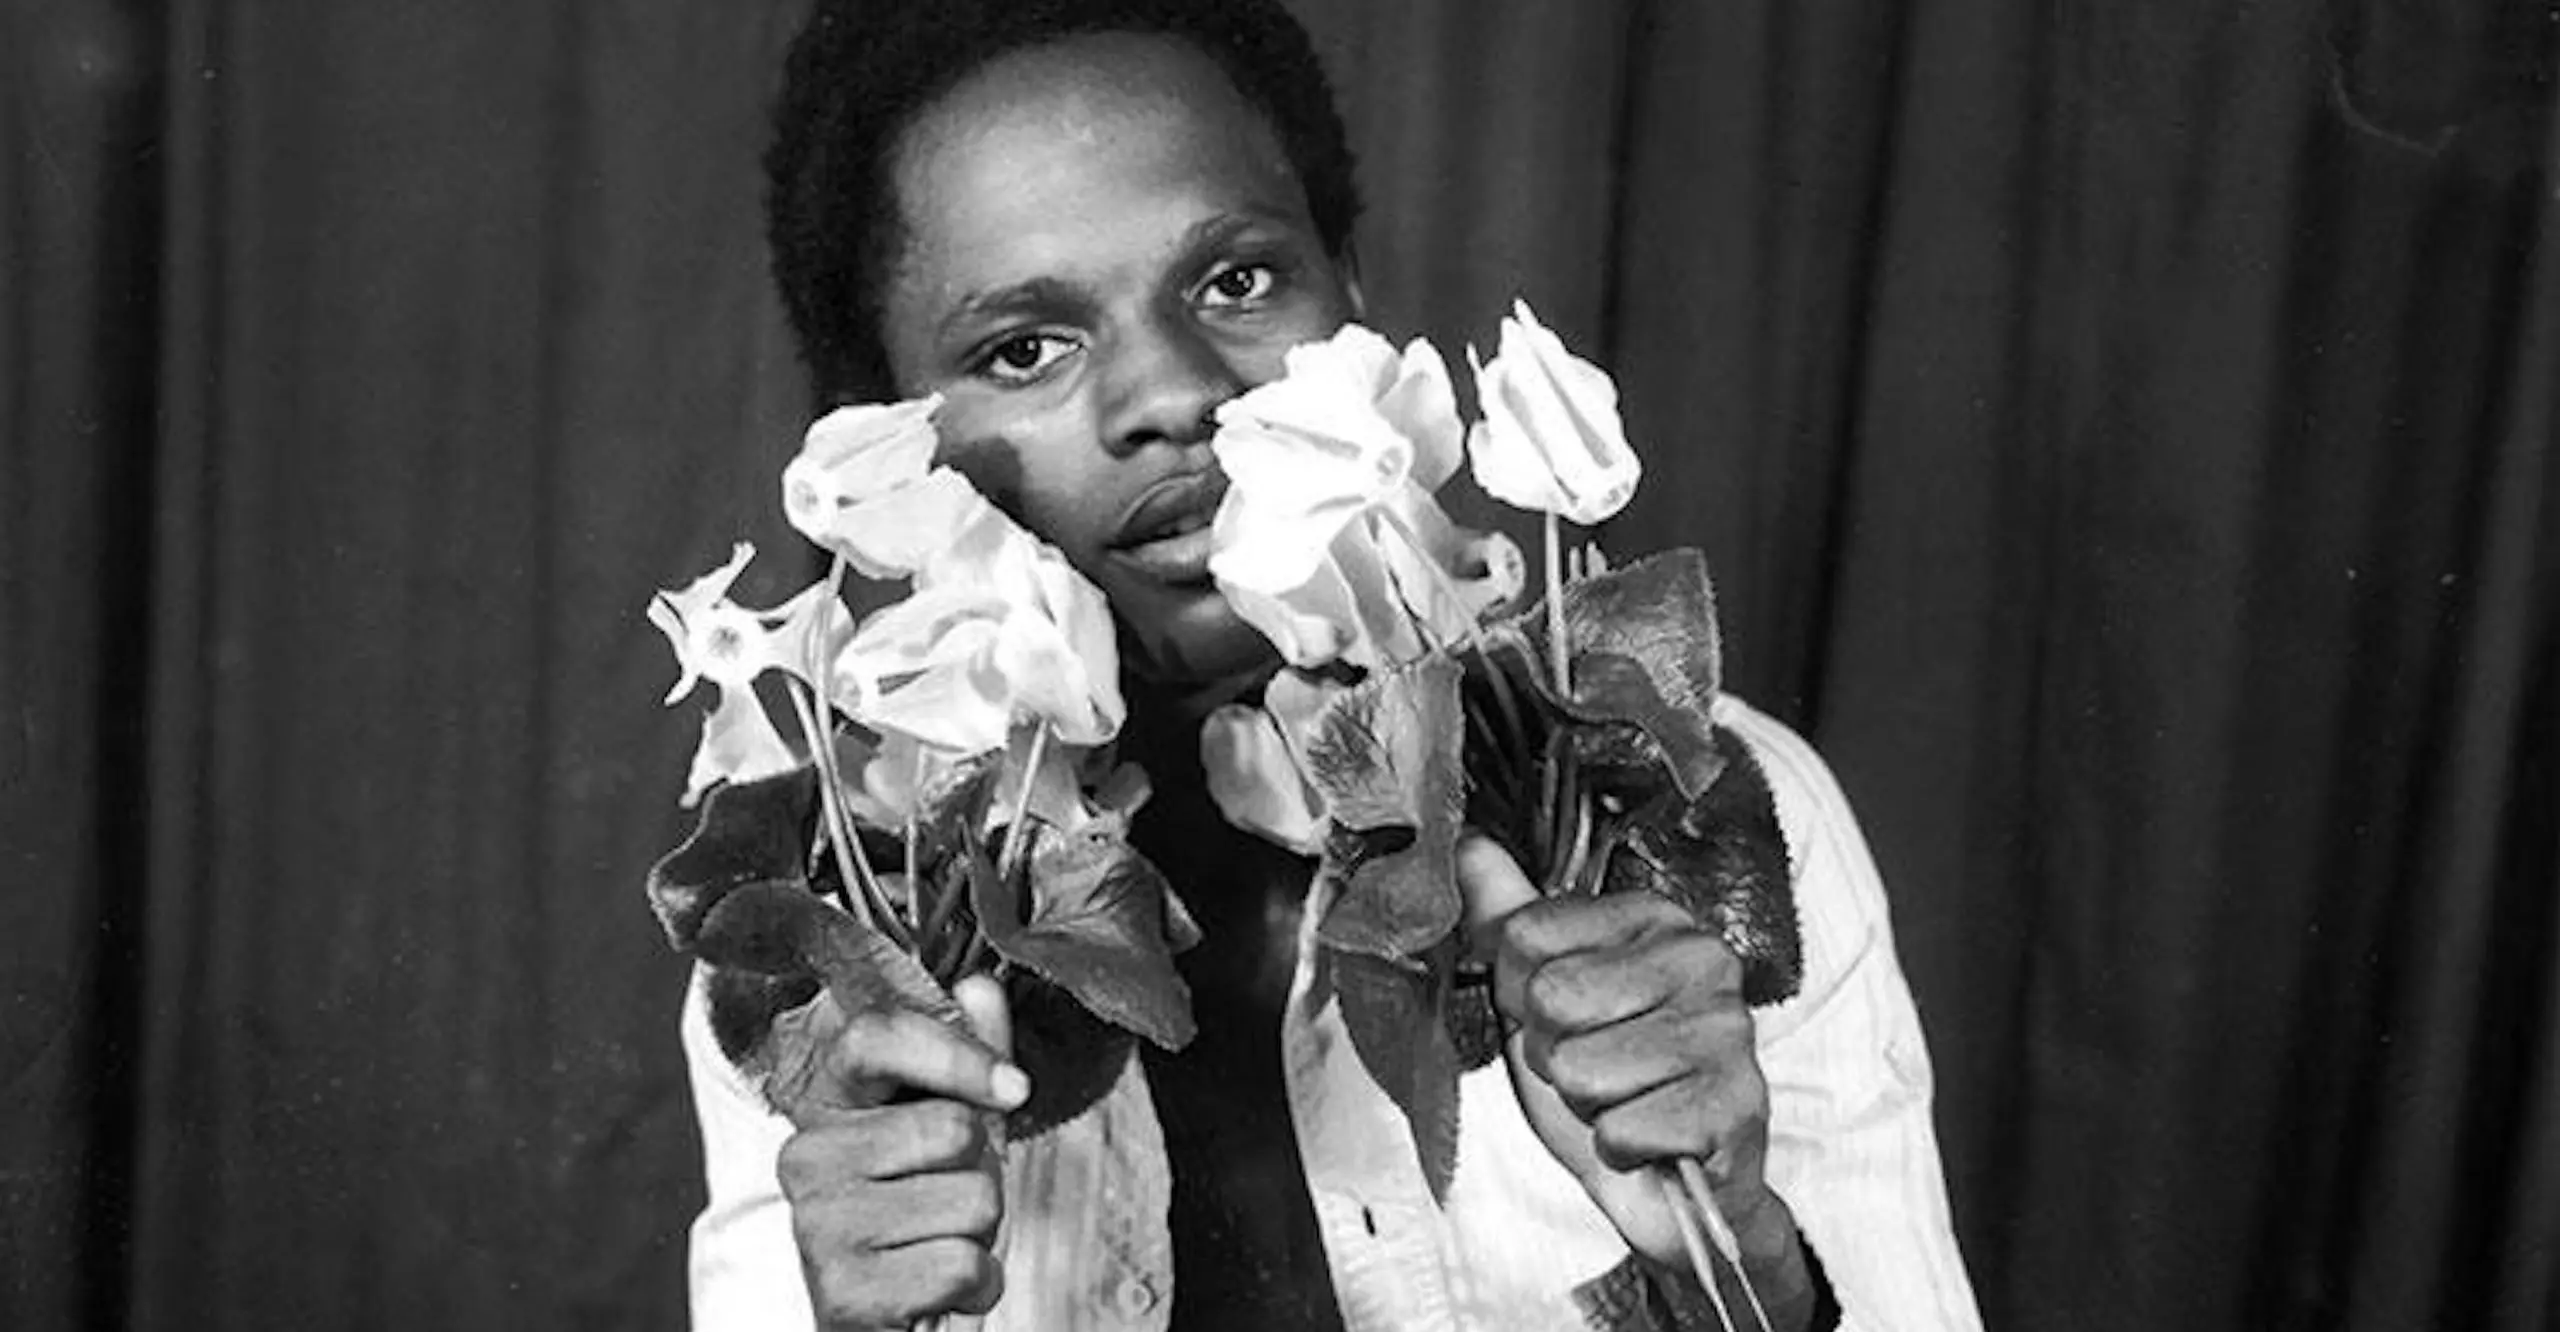 A young man holds flowers to his face in a studio portrait